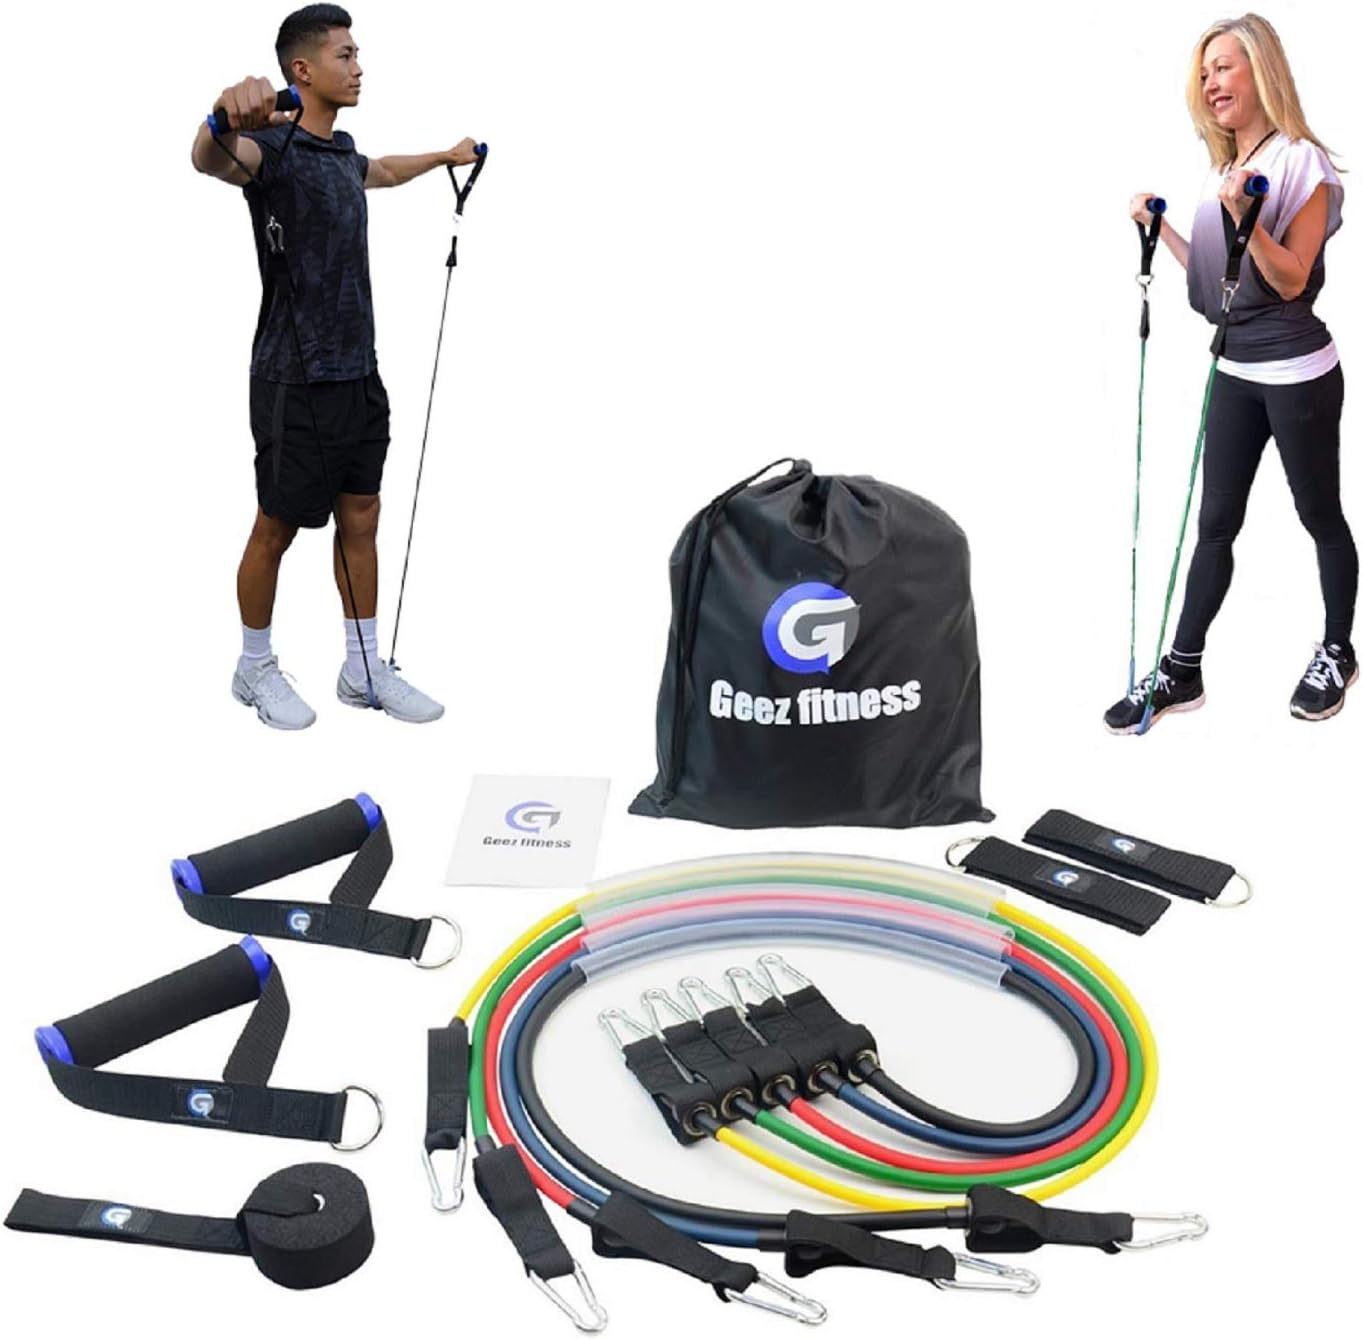 Geez Fitness Resistance Bands Full Set for Women and Men, Mobility, Strength Training Body  Injury Rehab, Door Anchor, Bands for Chest, Thighs, Legs, Arms, glutes, ankle straps  handles. Free Ebook.